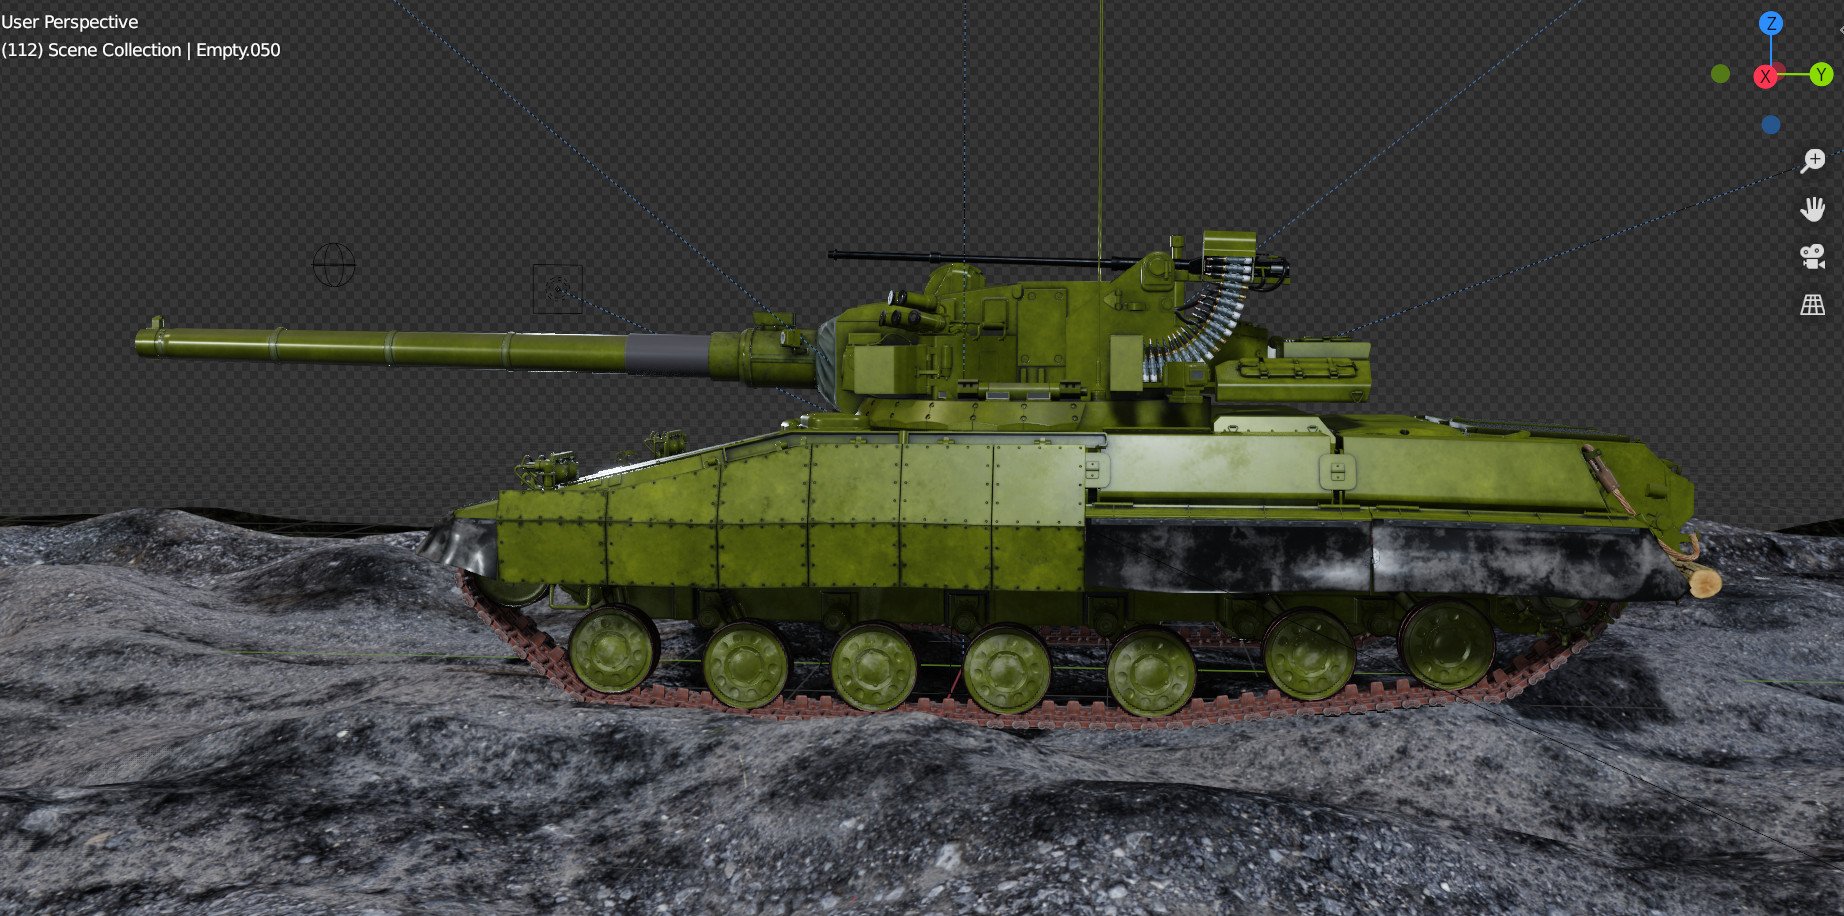 Rendering of Object 477 by the xmszeon.